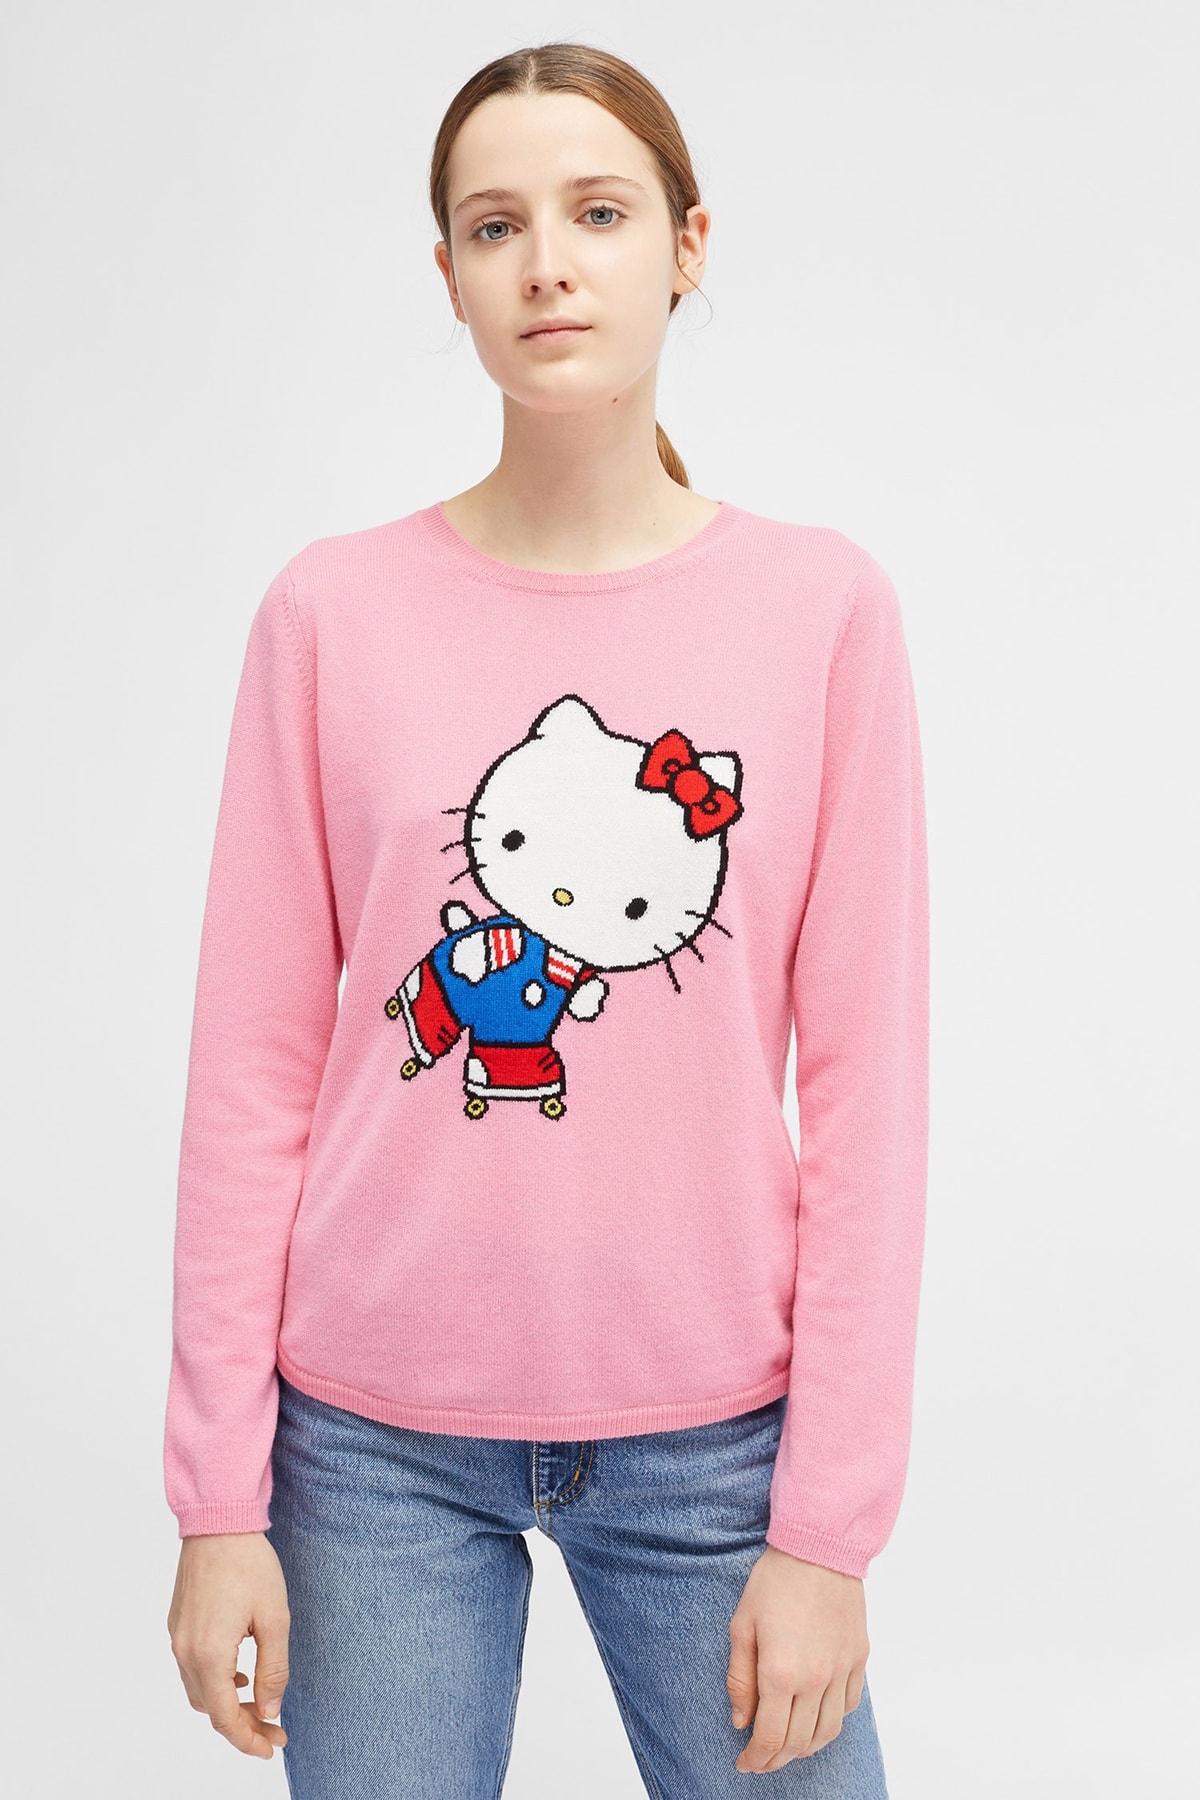 Hello Kitty x Chinti & Parker Collection | Hypebae